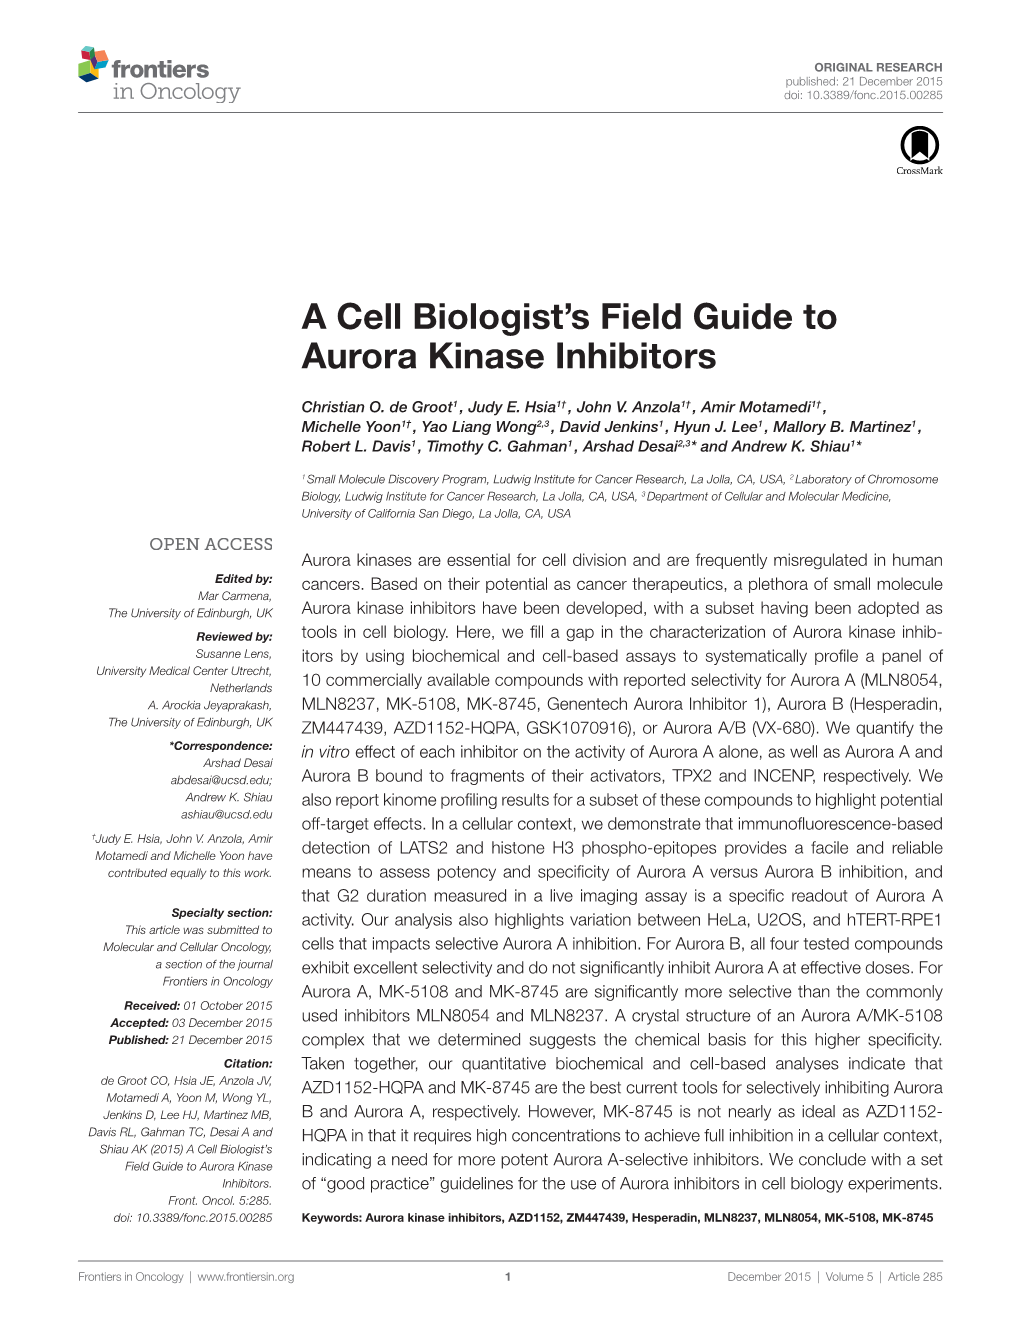 A Cell Biologist's Field Guide to Aurora Kinase Inhibitors